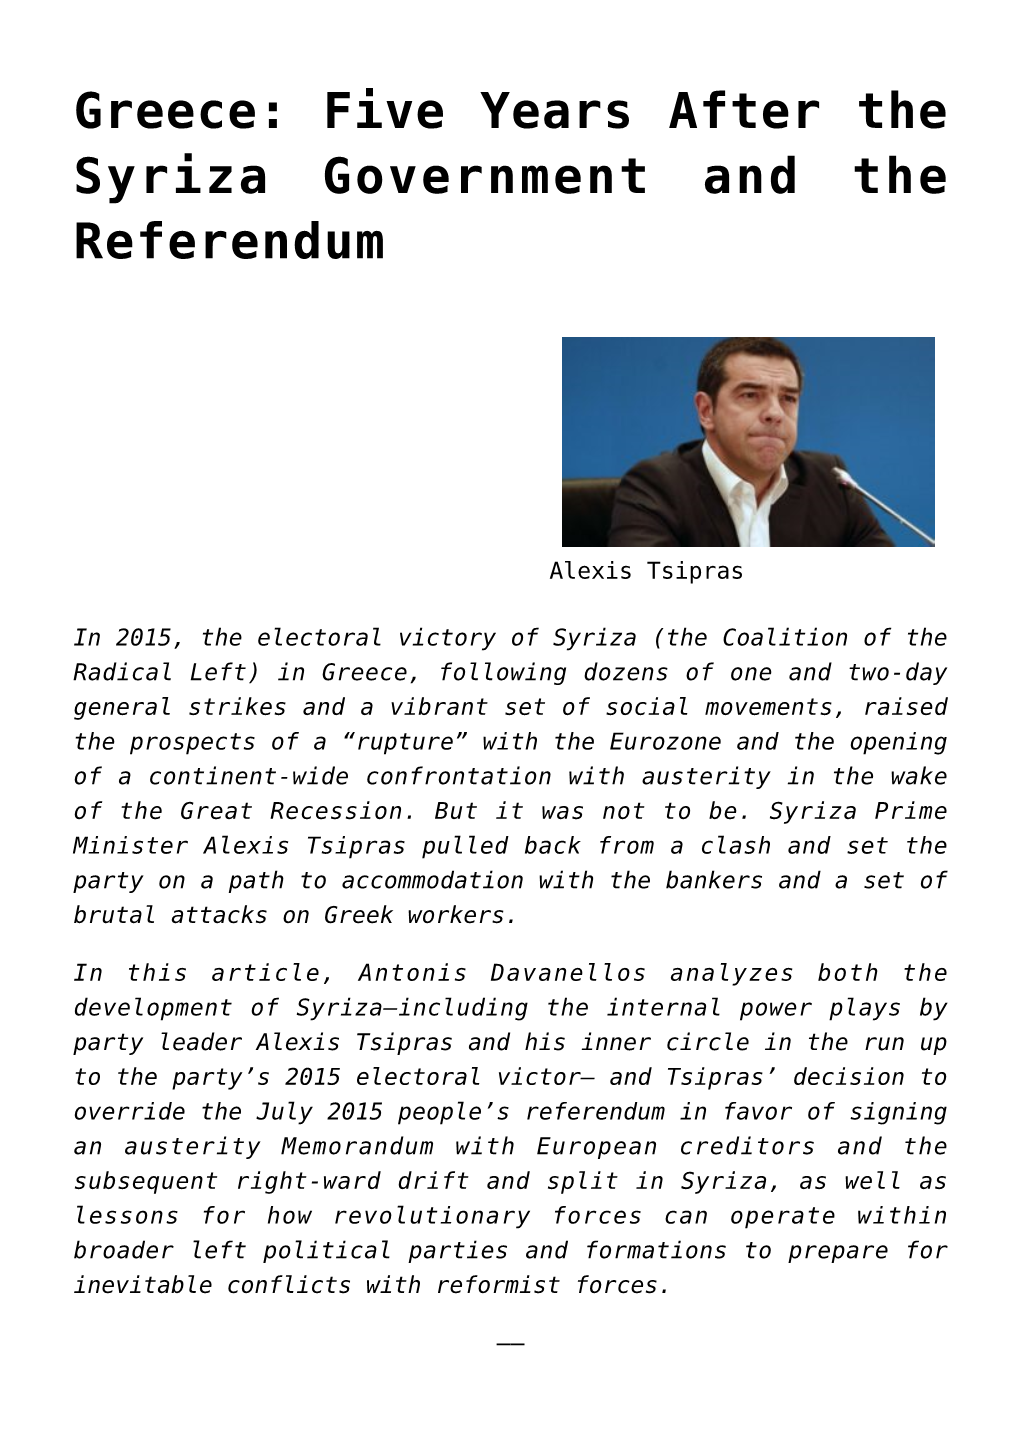 Greece: Five Years After the Syriza Government and the Referendum